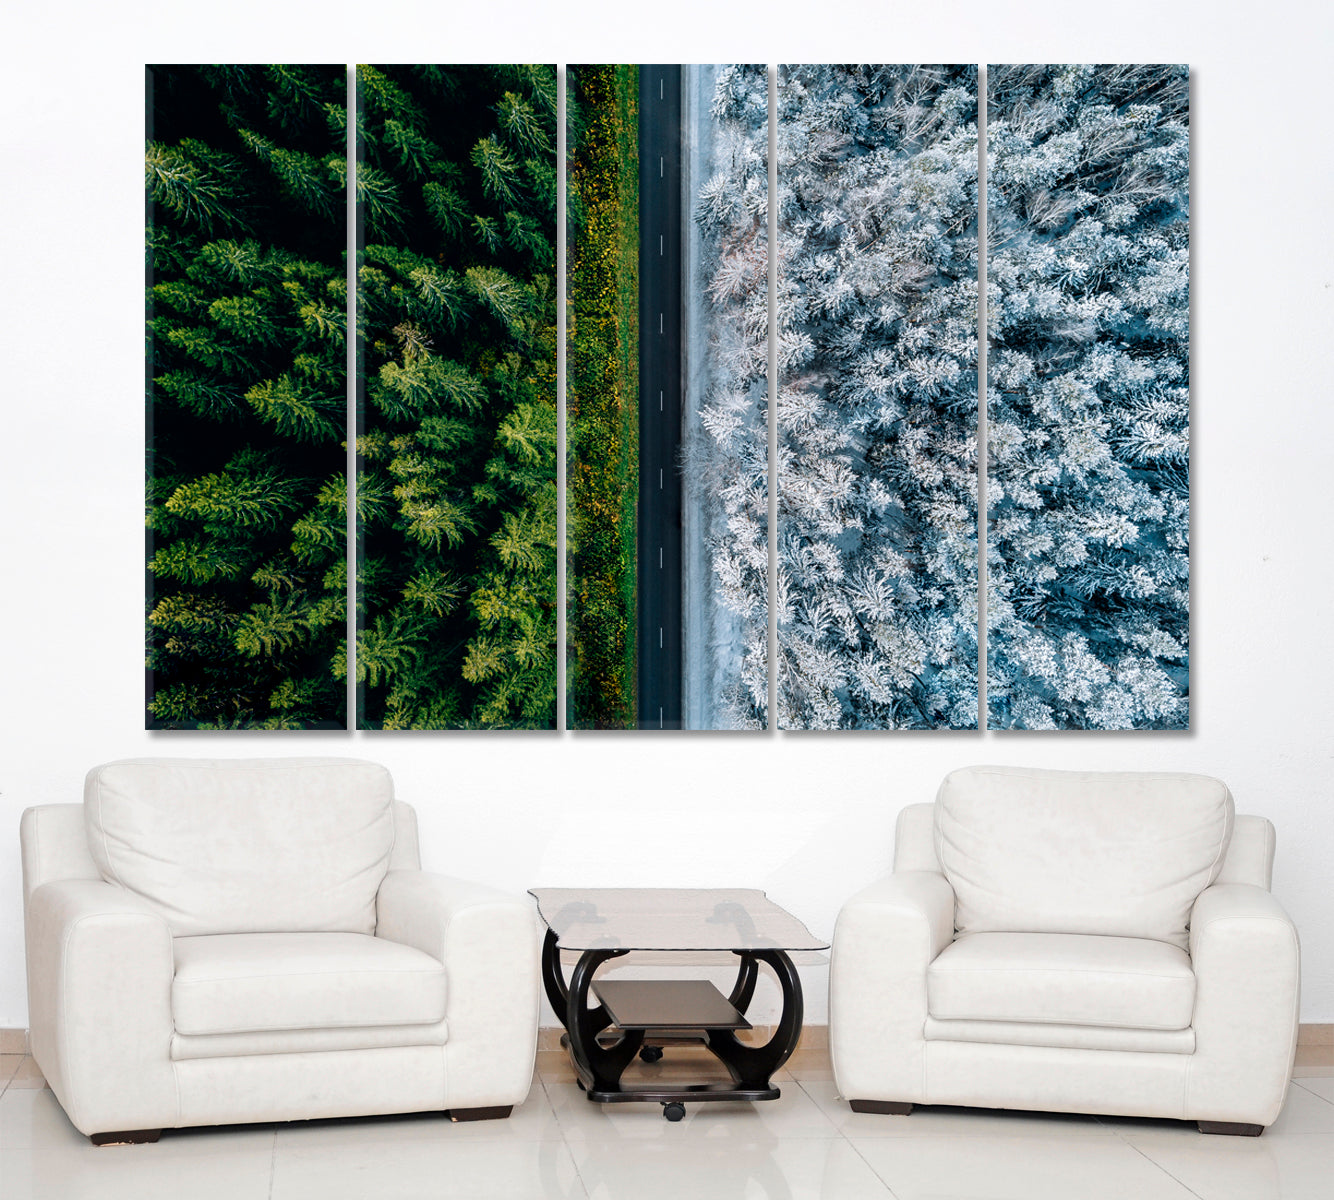 TWO SEASONS Highway Road Through The Forest Aerial View Scenery Landcape Artesty 5 panels 36" x 24" 